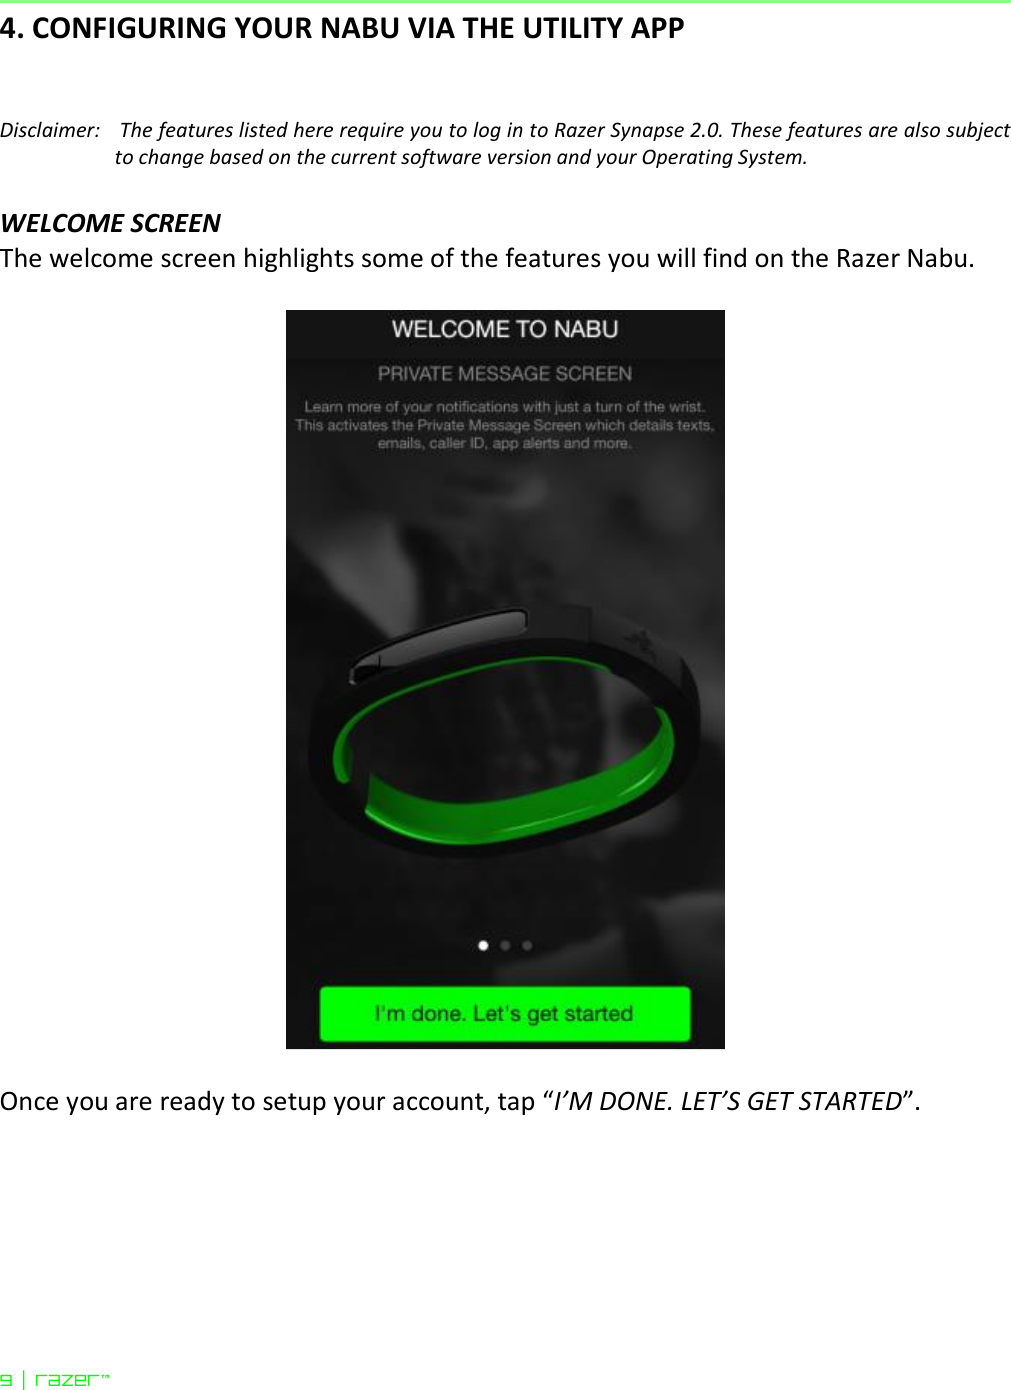  9 | razer™  4. CONFIGURING YOUR NABU VIA THE UTILITY APP   Disclaimer:   The features listed here require you to log in to Razer Synapse 2.0. These features are also subject to change based on the current software version and your Operating System.  WELCOME SCREEN The welcome screen highlights some of the features you will find on the Razer Nabu.    Once you are ready to setup your account, tap “I’M DONE. LET’S GET STARTED”.  